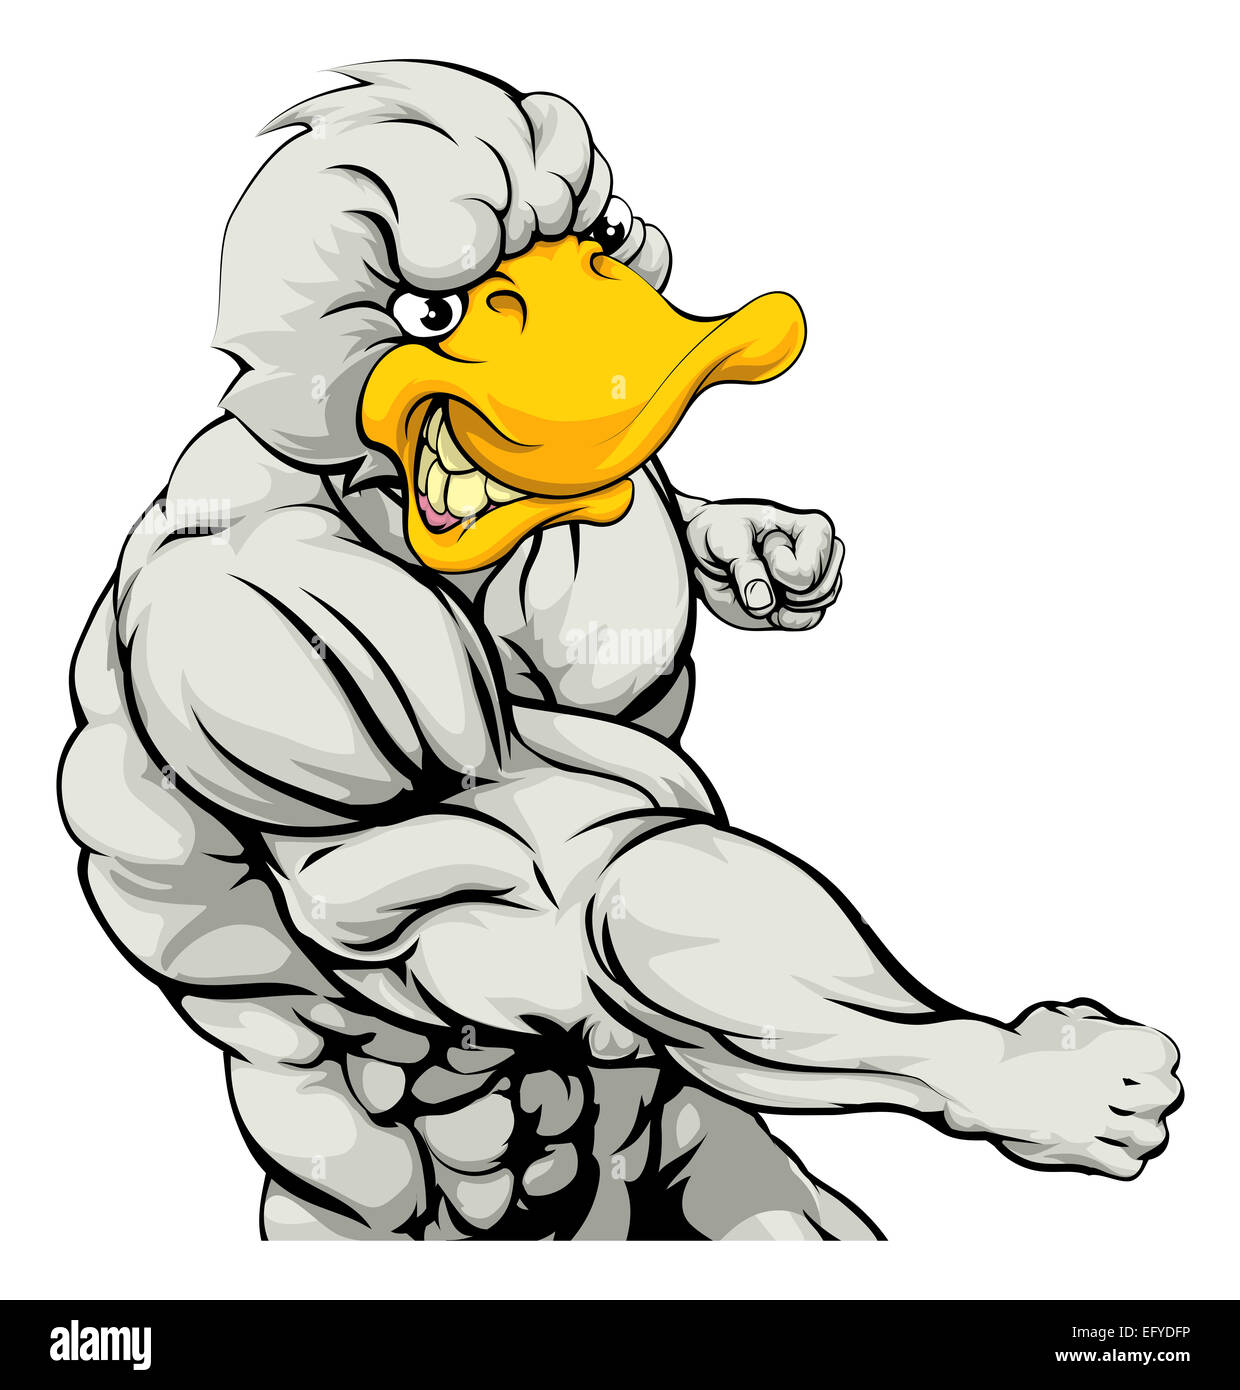 A mean looking duck character mascot fighting and punching with fist Stock Photo